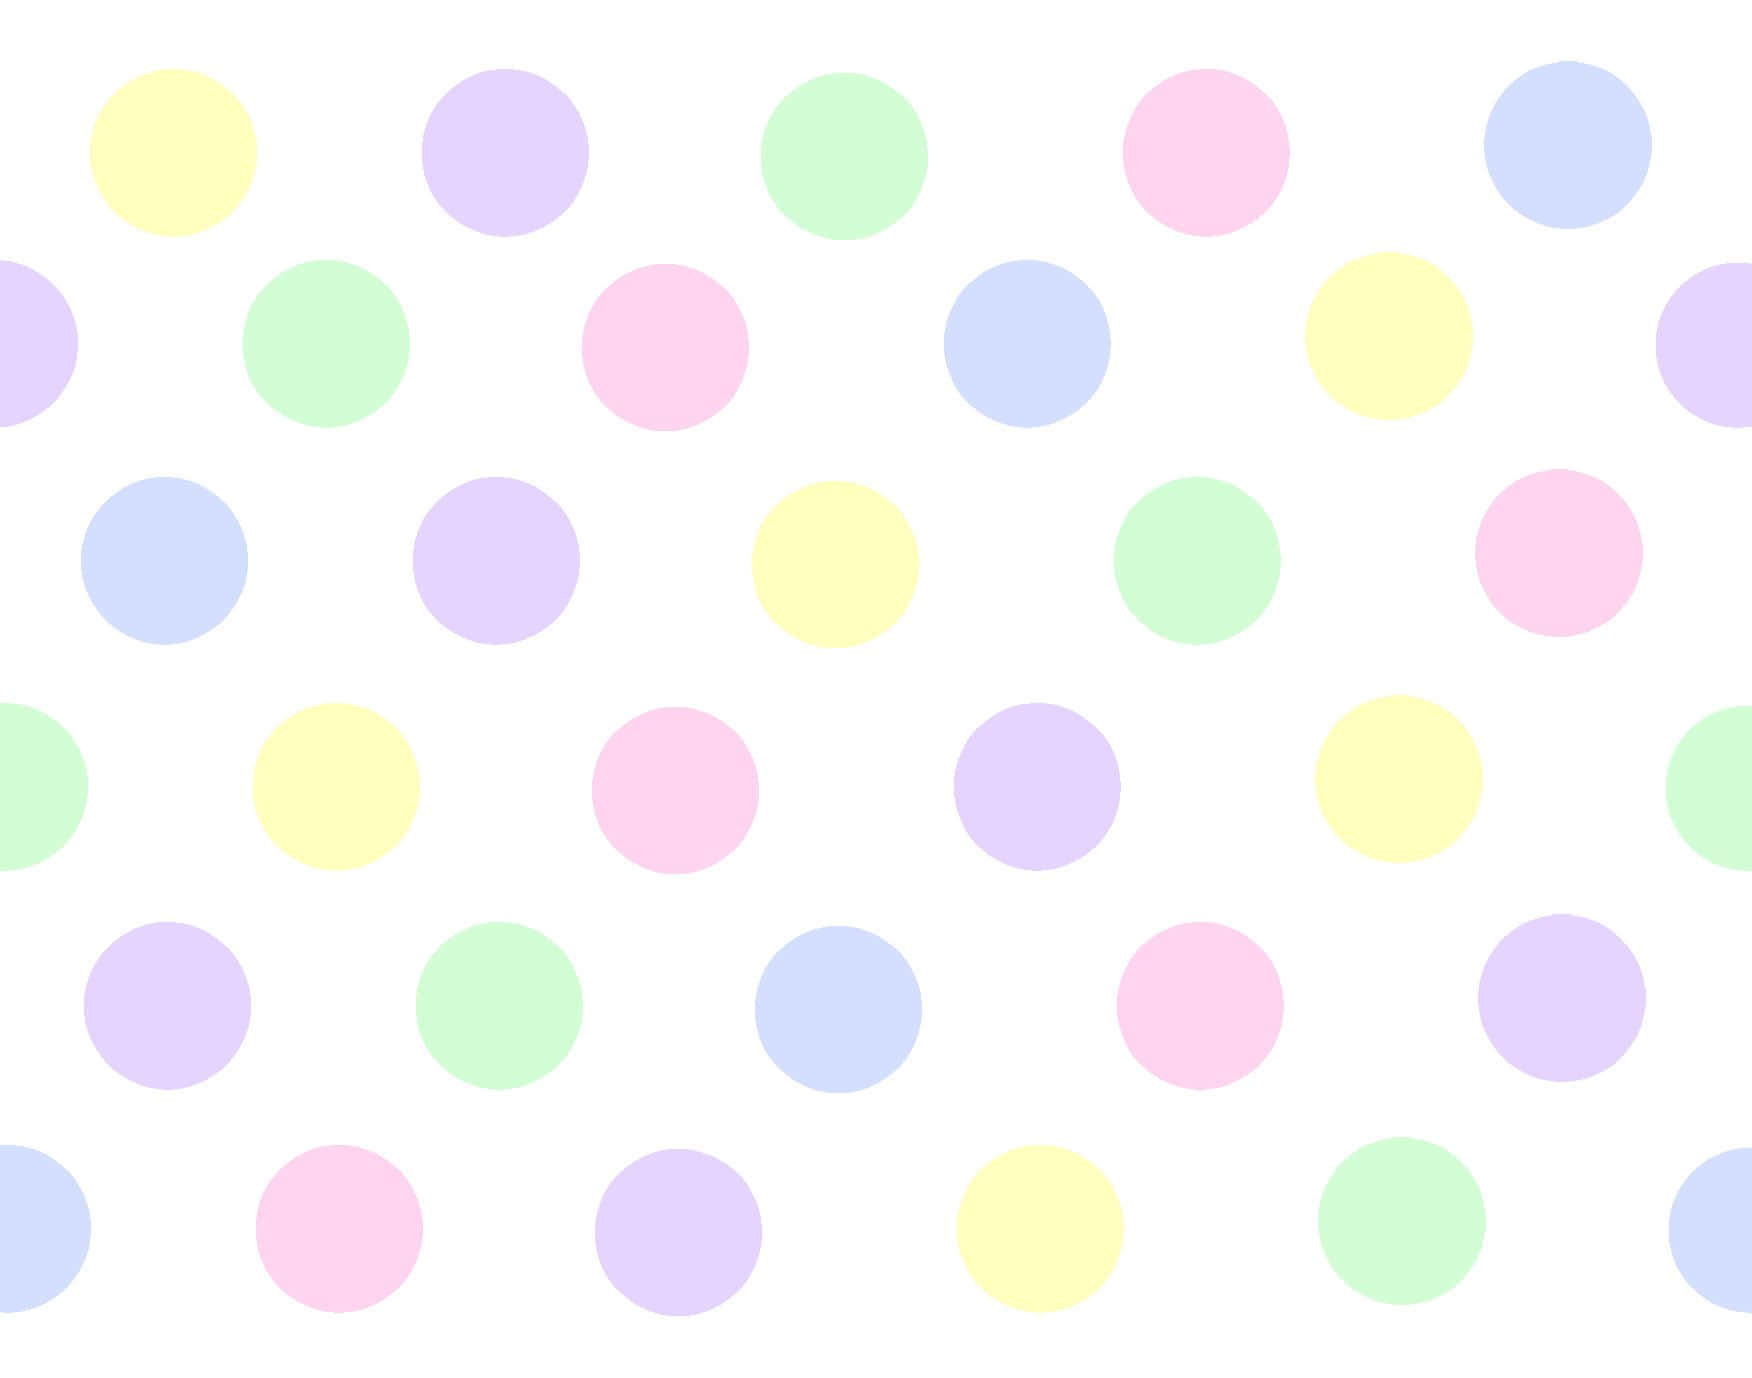 polkadots wallpaper:Amazon.com:Appstore for Android